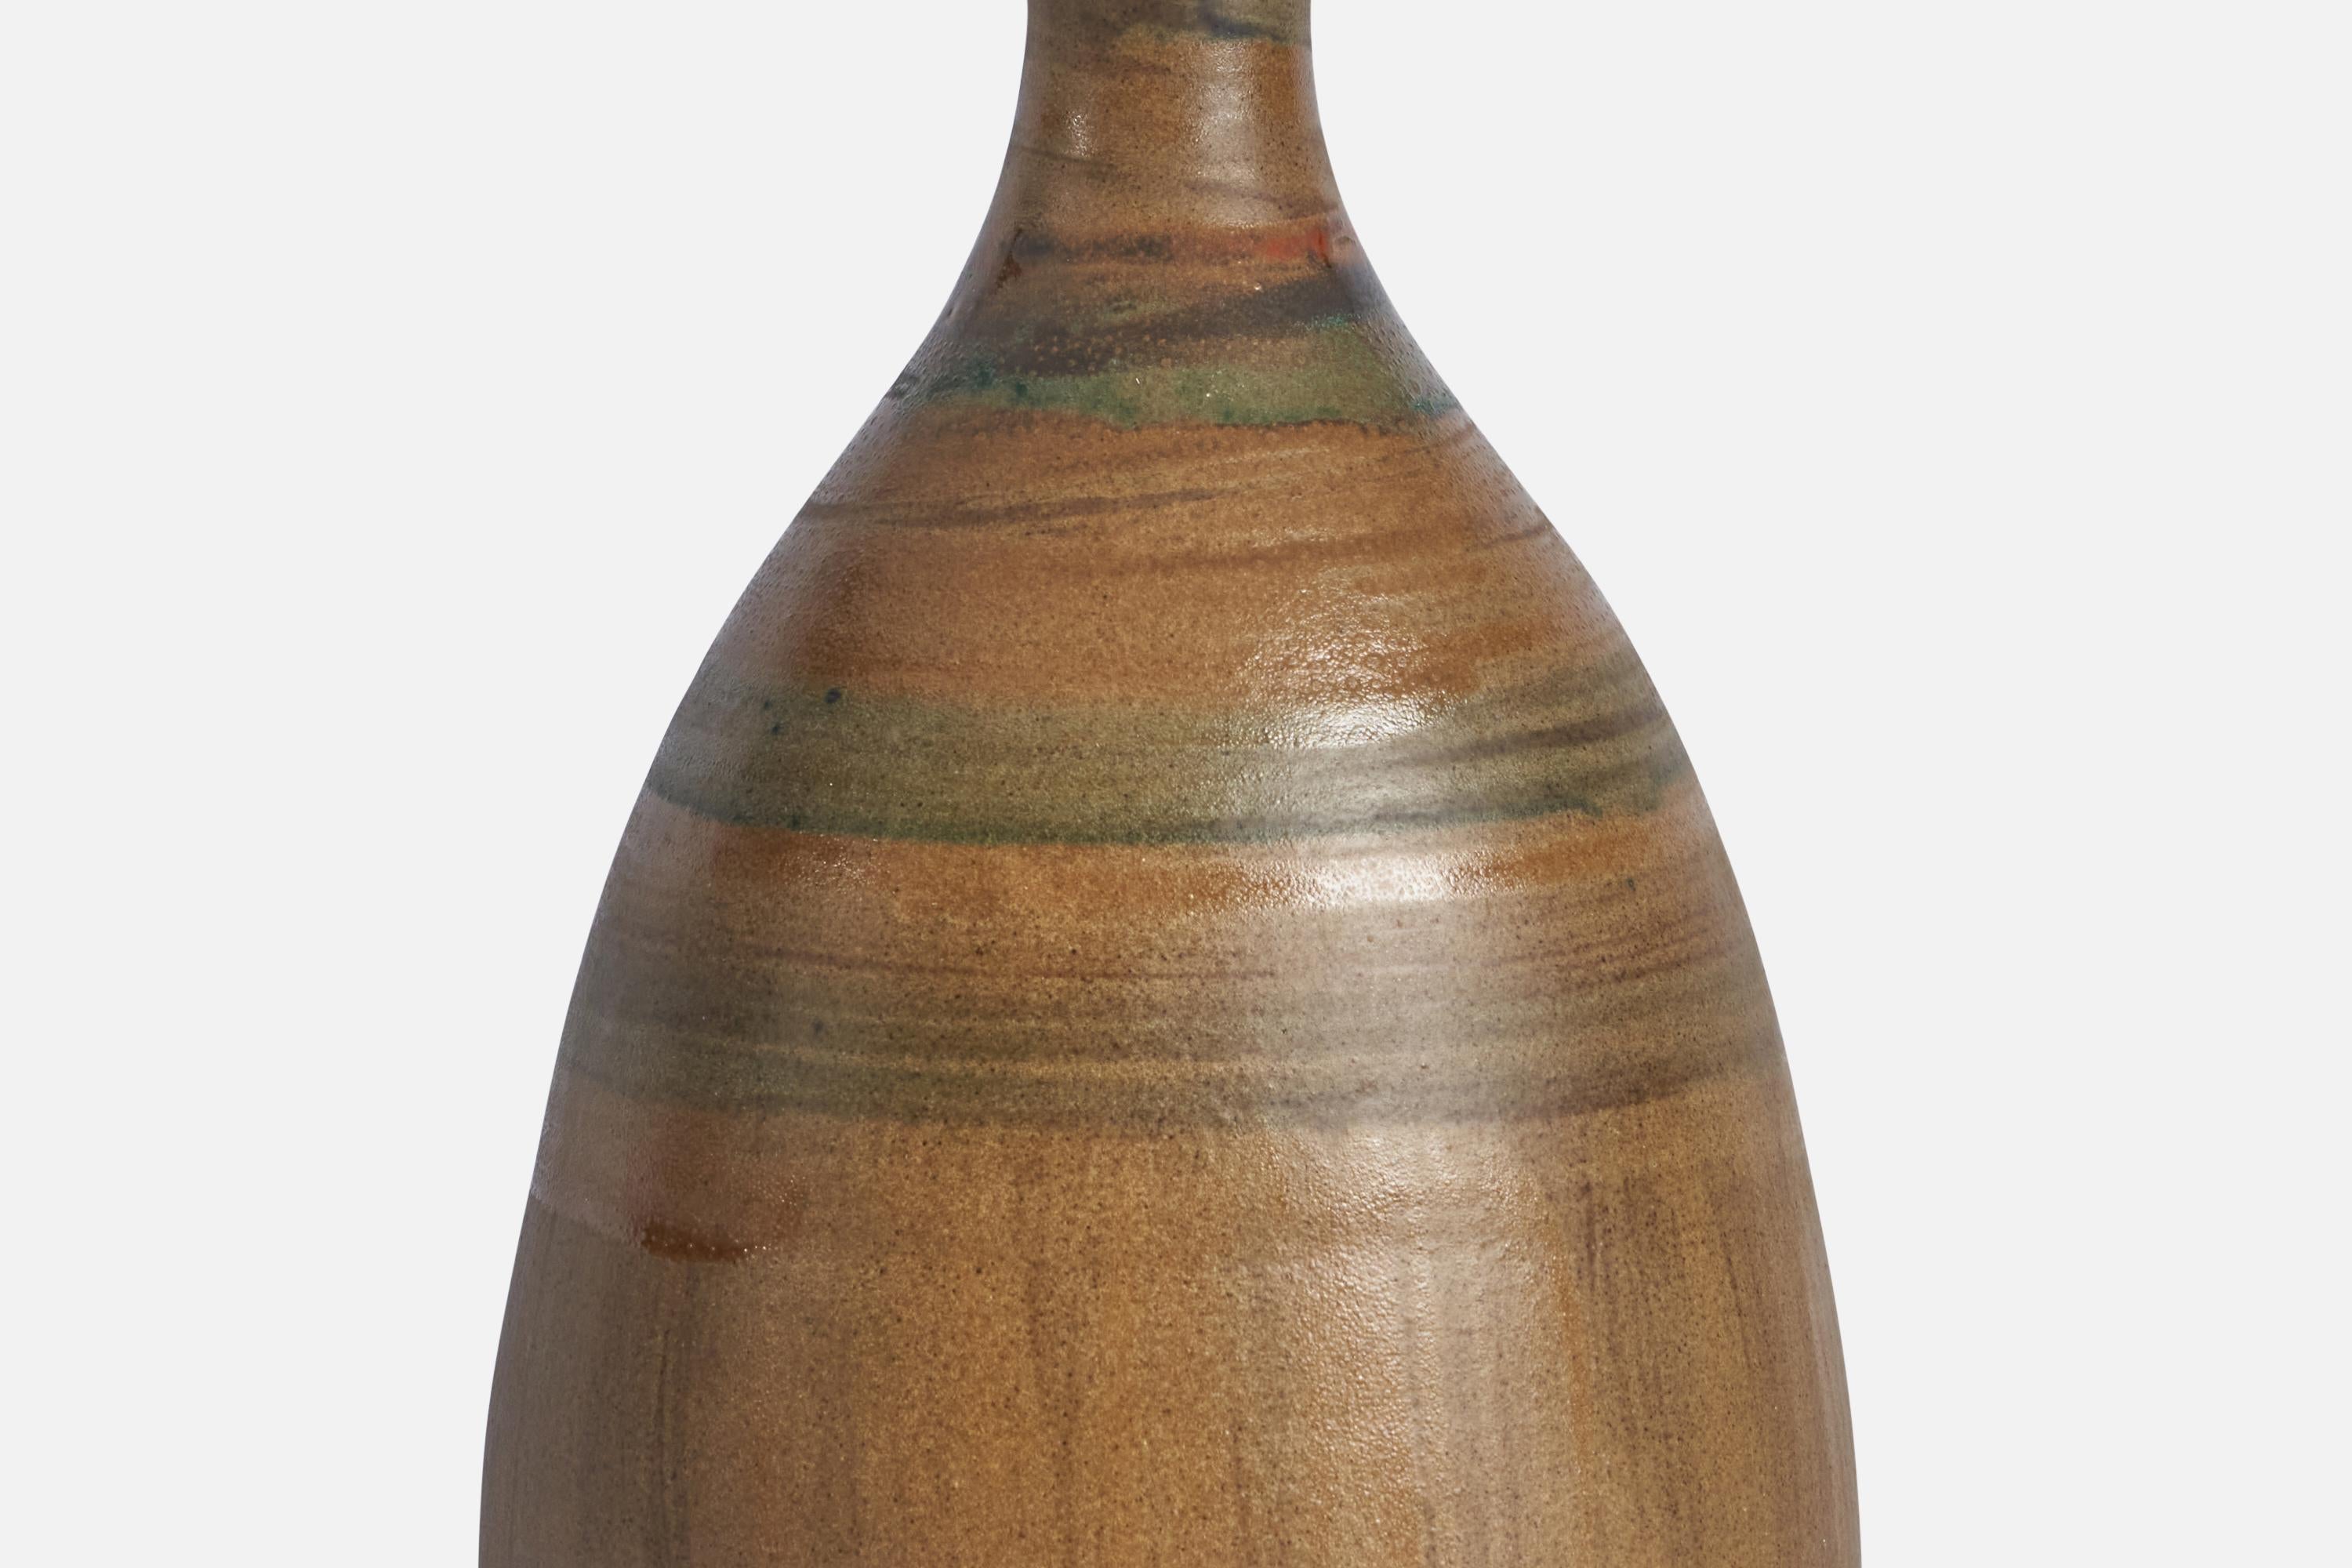 A brown and green-glazed ceramic table lamp designed and produced in Denmark, 1960s.

Dimensions of Lamp (inches): 14” H x 6.25” Diameter
Dimensions of Shade (inches): 4.5” Top Diameter x 16” Bottom Diameter x 7.15” H 
Dimensions of Lamp with Shade